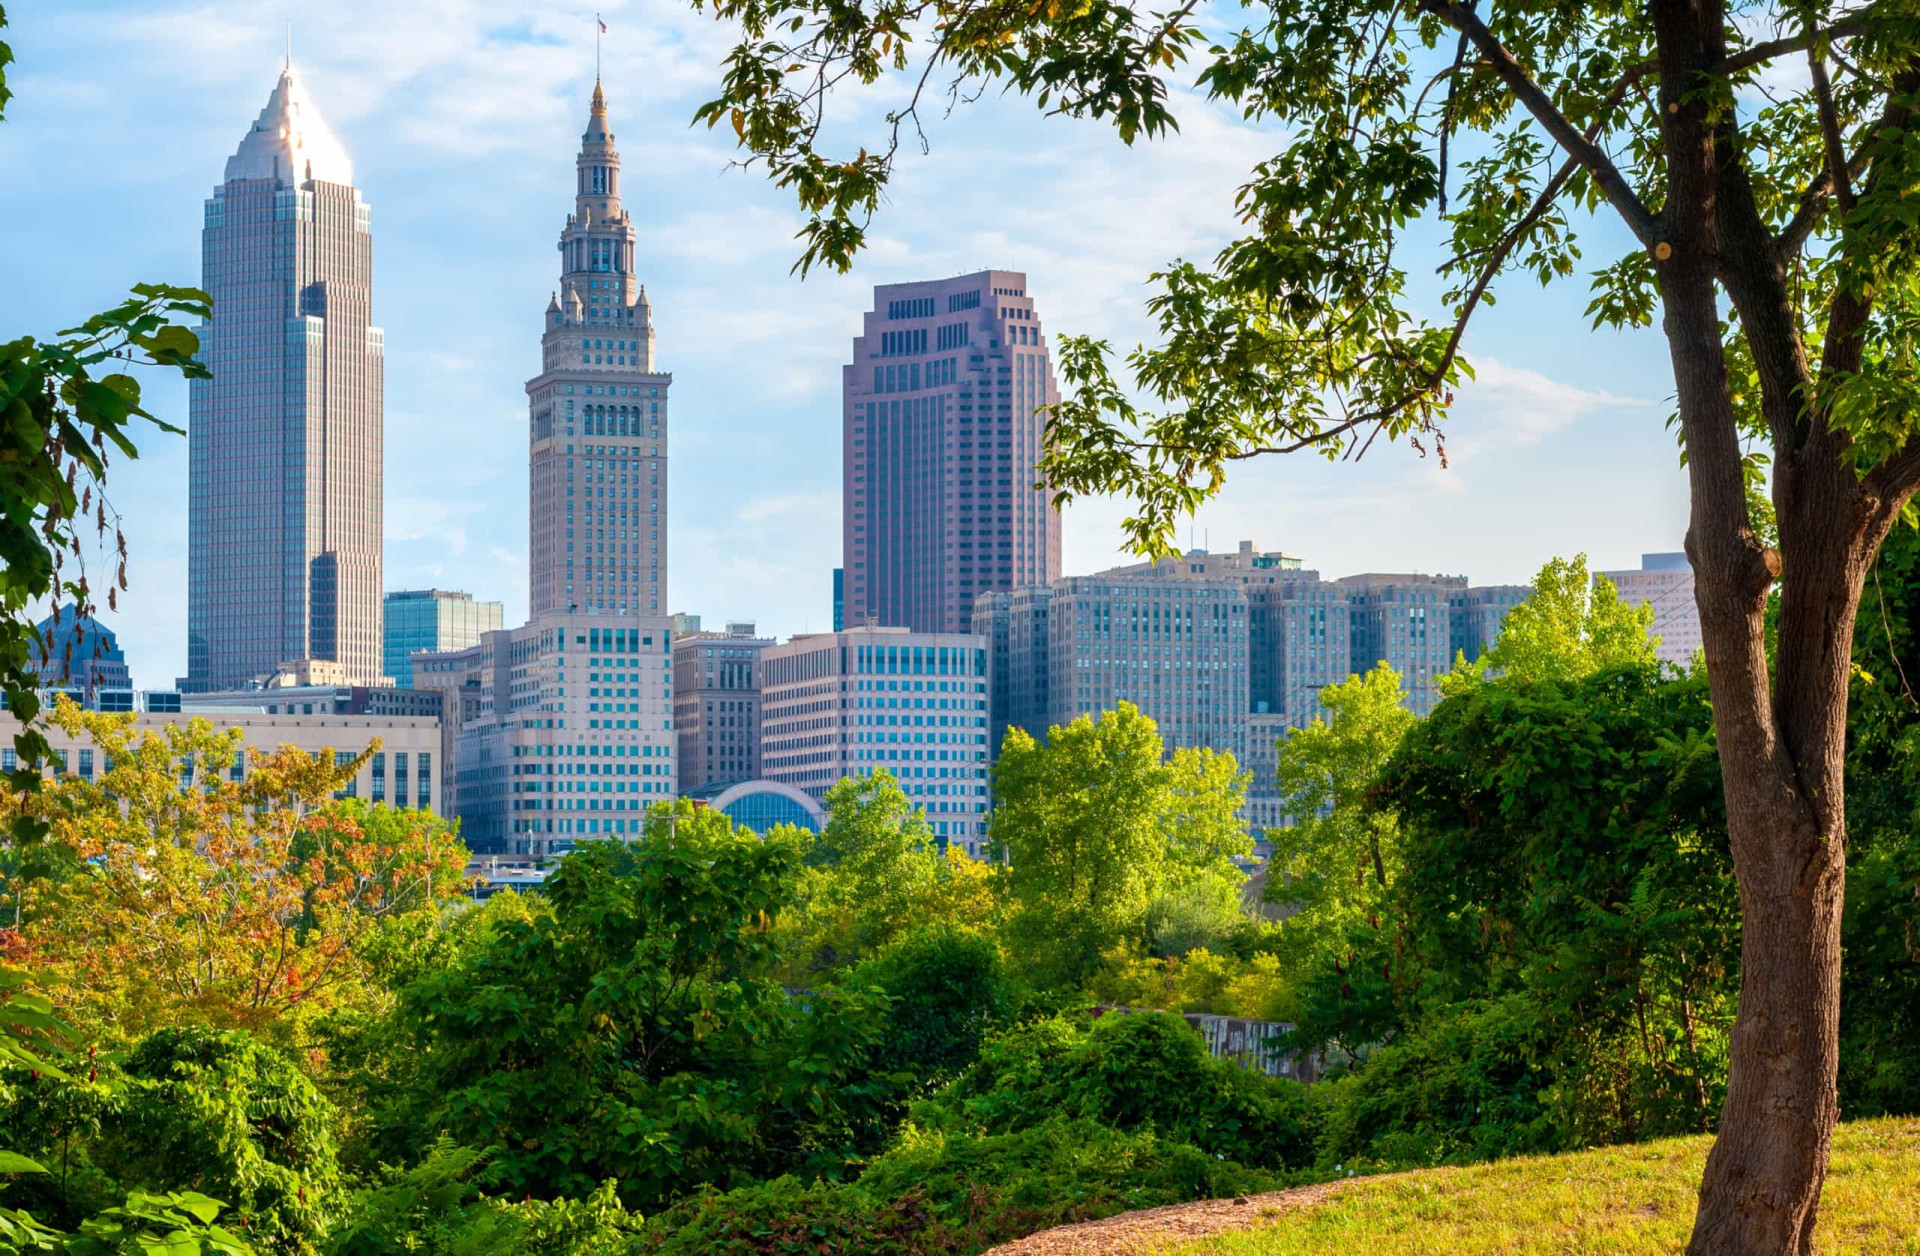 <p>Cleveland is the second largest city in Ohio, and has long been appreciated for its cultural clout. It's the largest city on Lake Erie and one of the major conurbations of the Great Lakes region. </p><p>You may also like:<a href="https://www.starsinsider.com/n/280798?utm_source=msn.com&utm_medium=display&utm_campaign=referral_description&utm_content=505282en-ca"> Australia's ominous and abandoned tunnels</a></p>